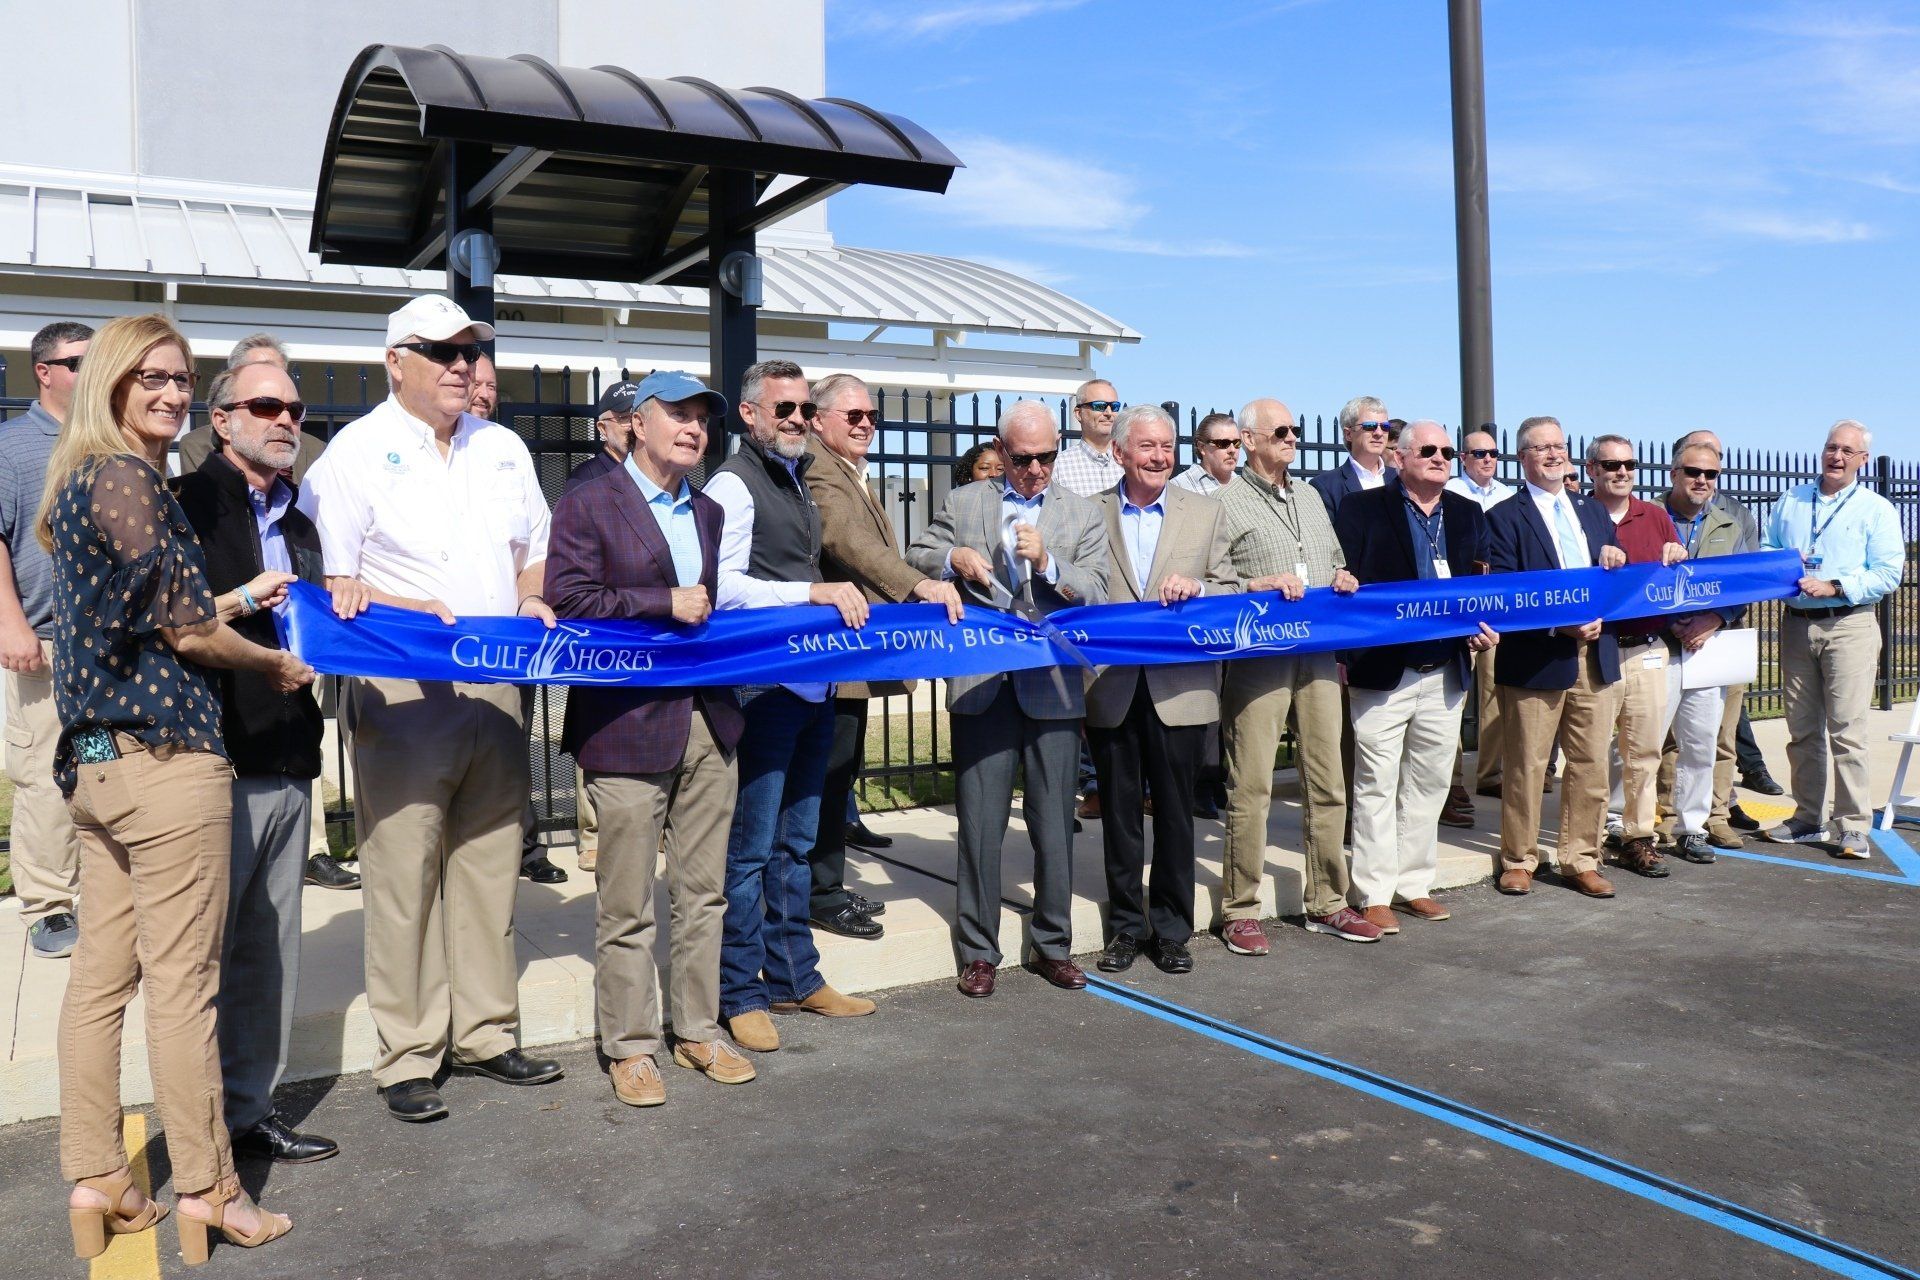 Ribbon cutting for the new airport tower in Gulf Shores, Alabama.